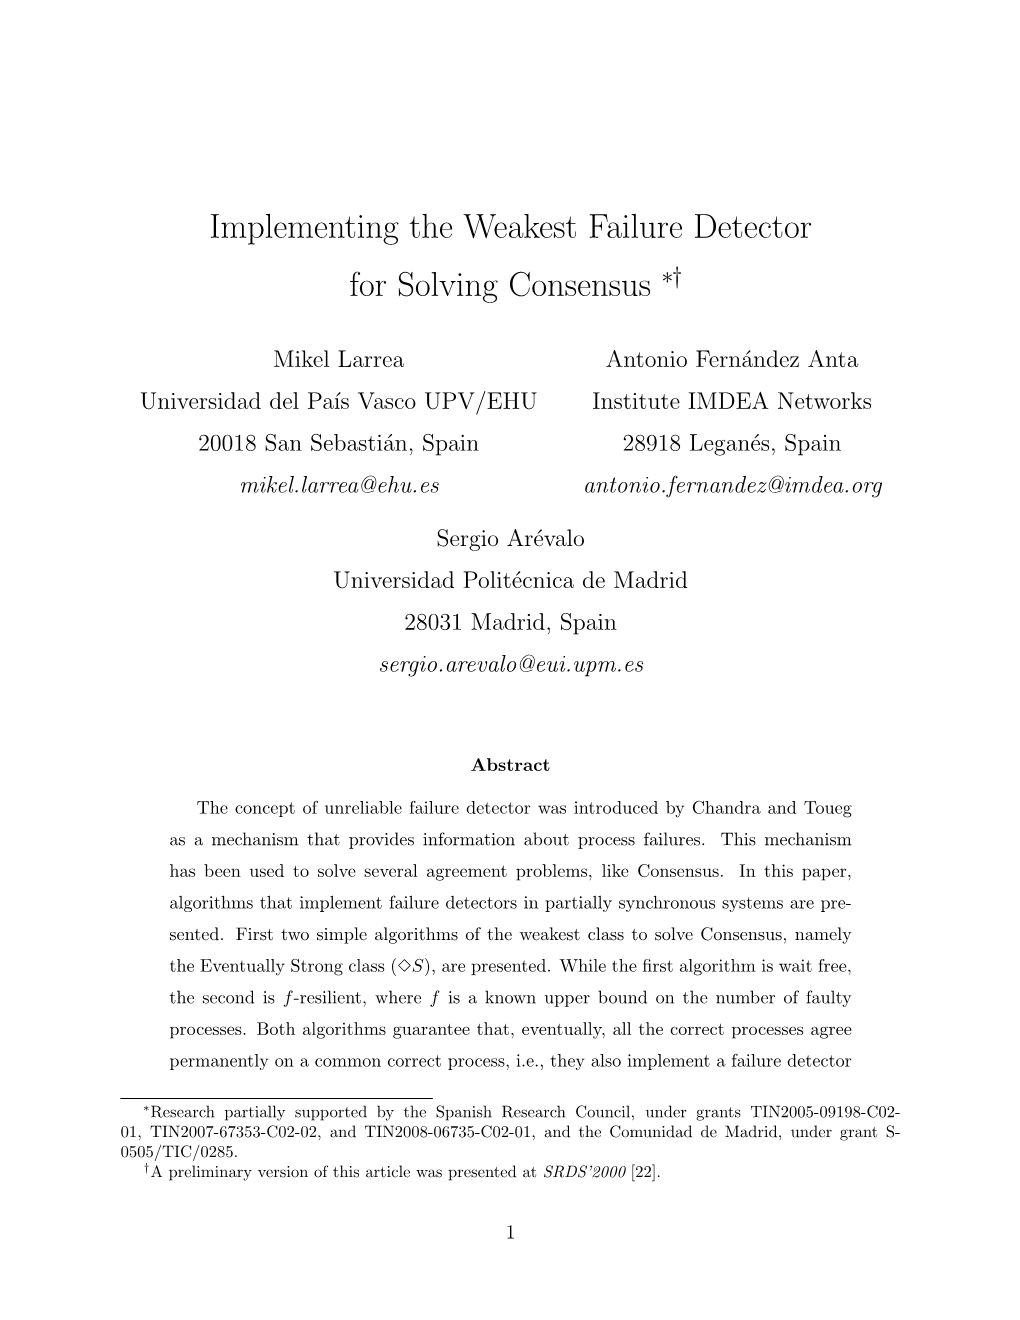 Implementing the Weakest Failure Detector for Solving Consensus ∗†